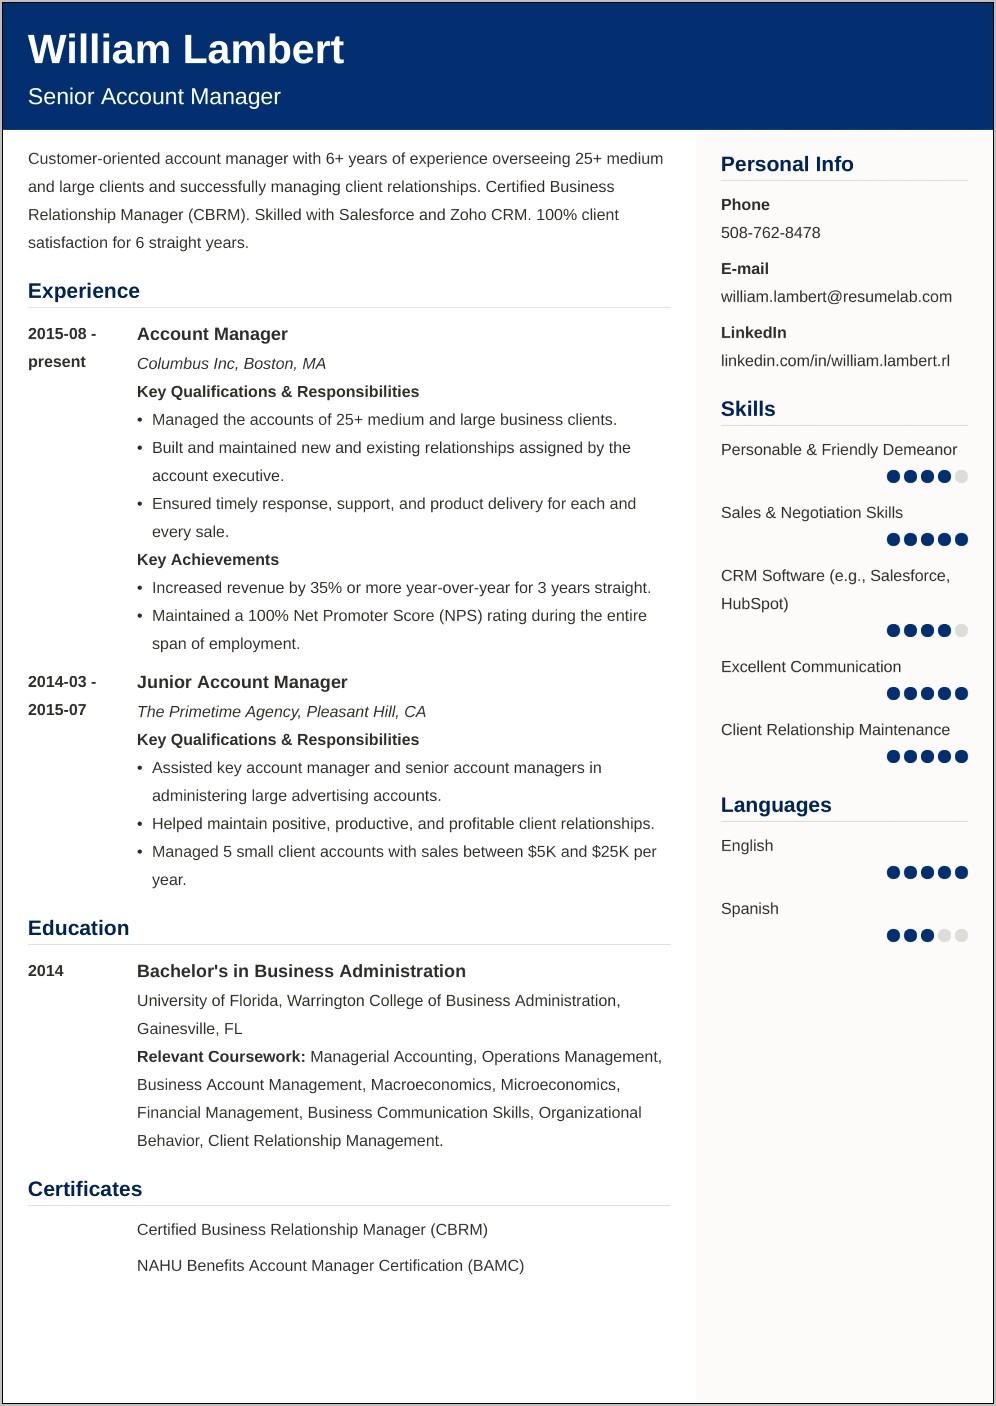 Level Of Experience Scale On Resume